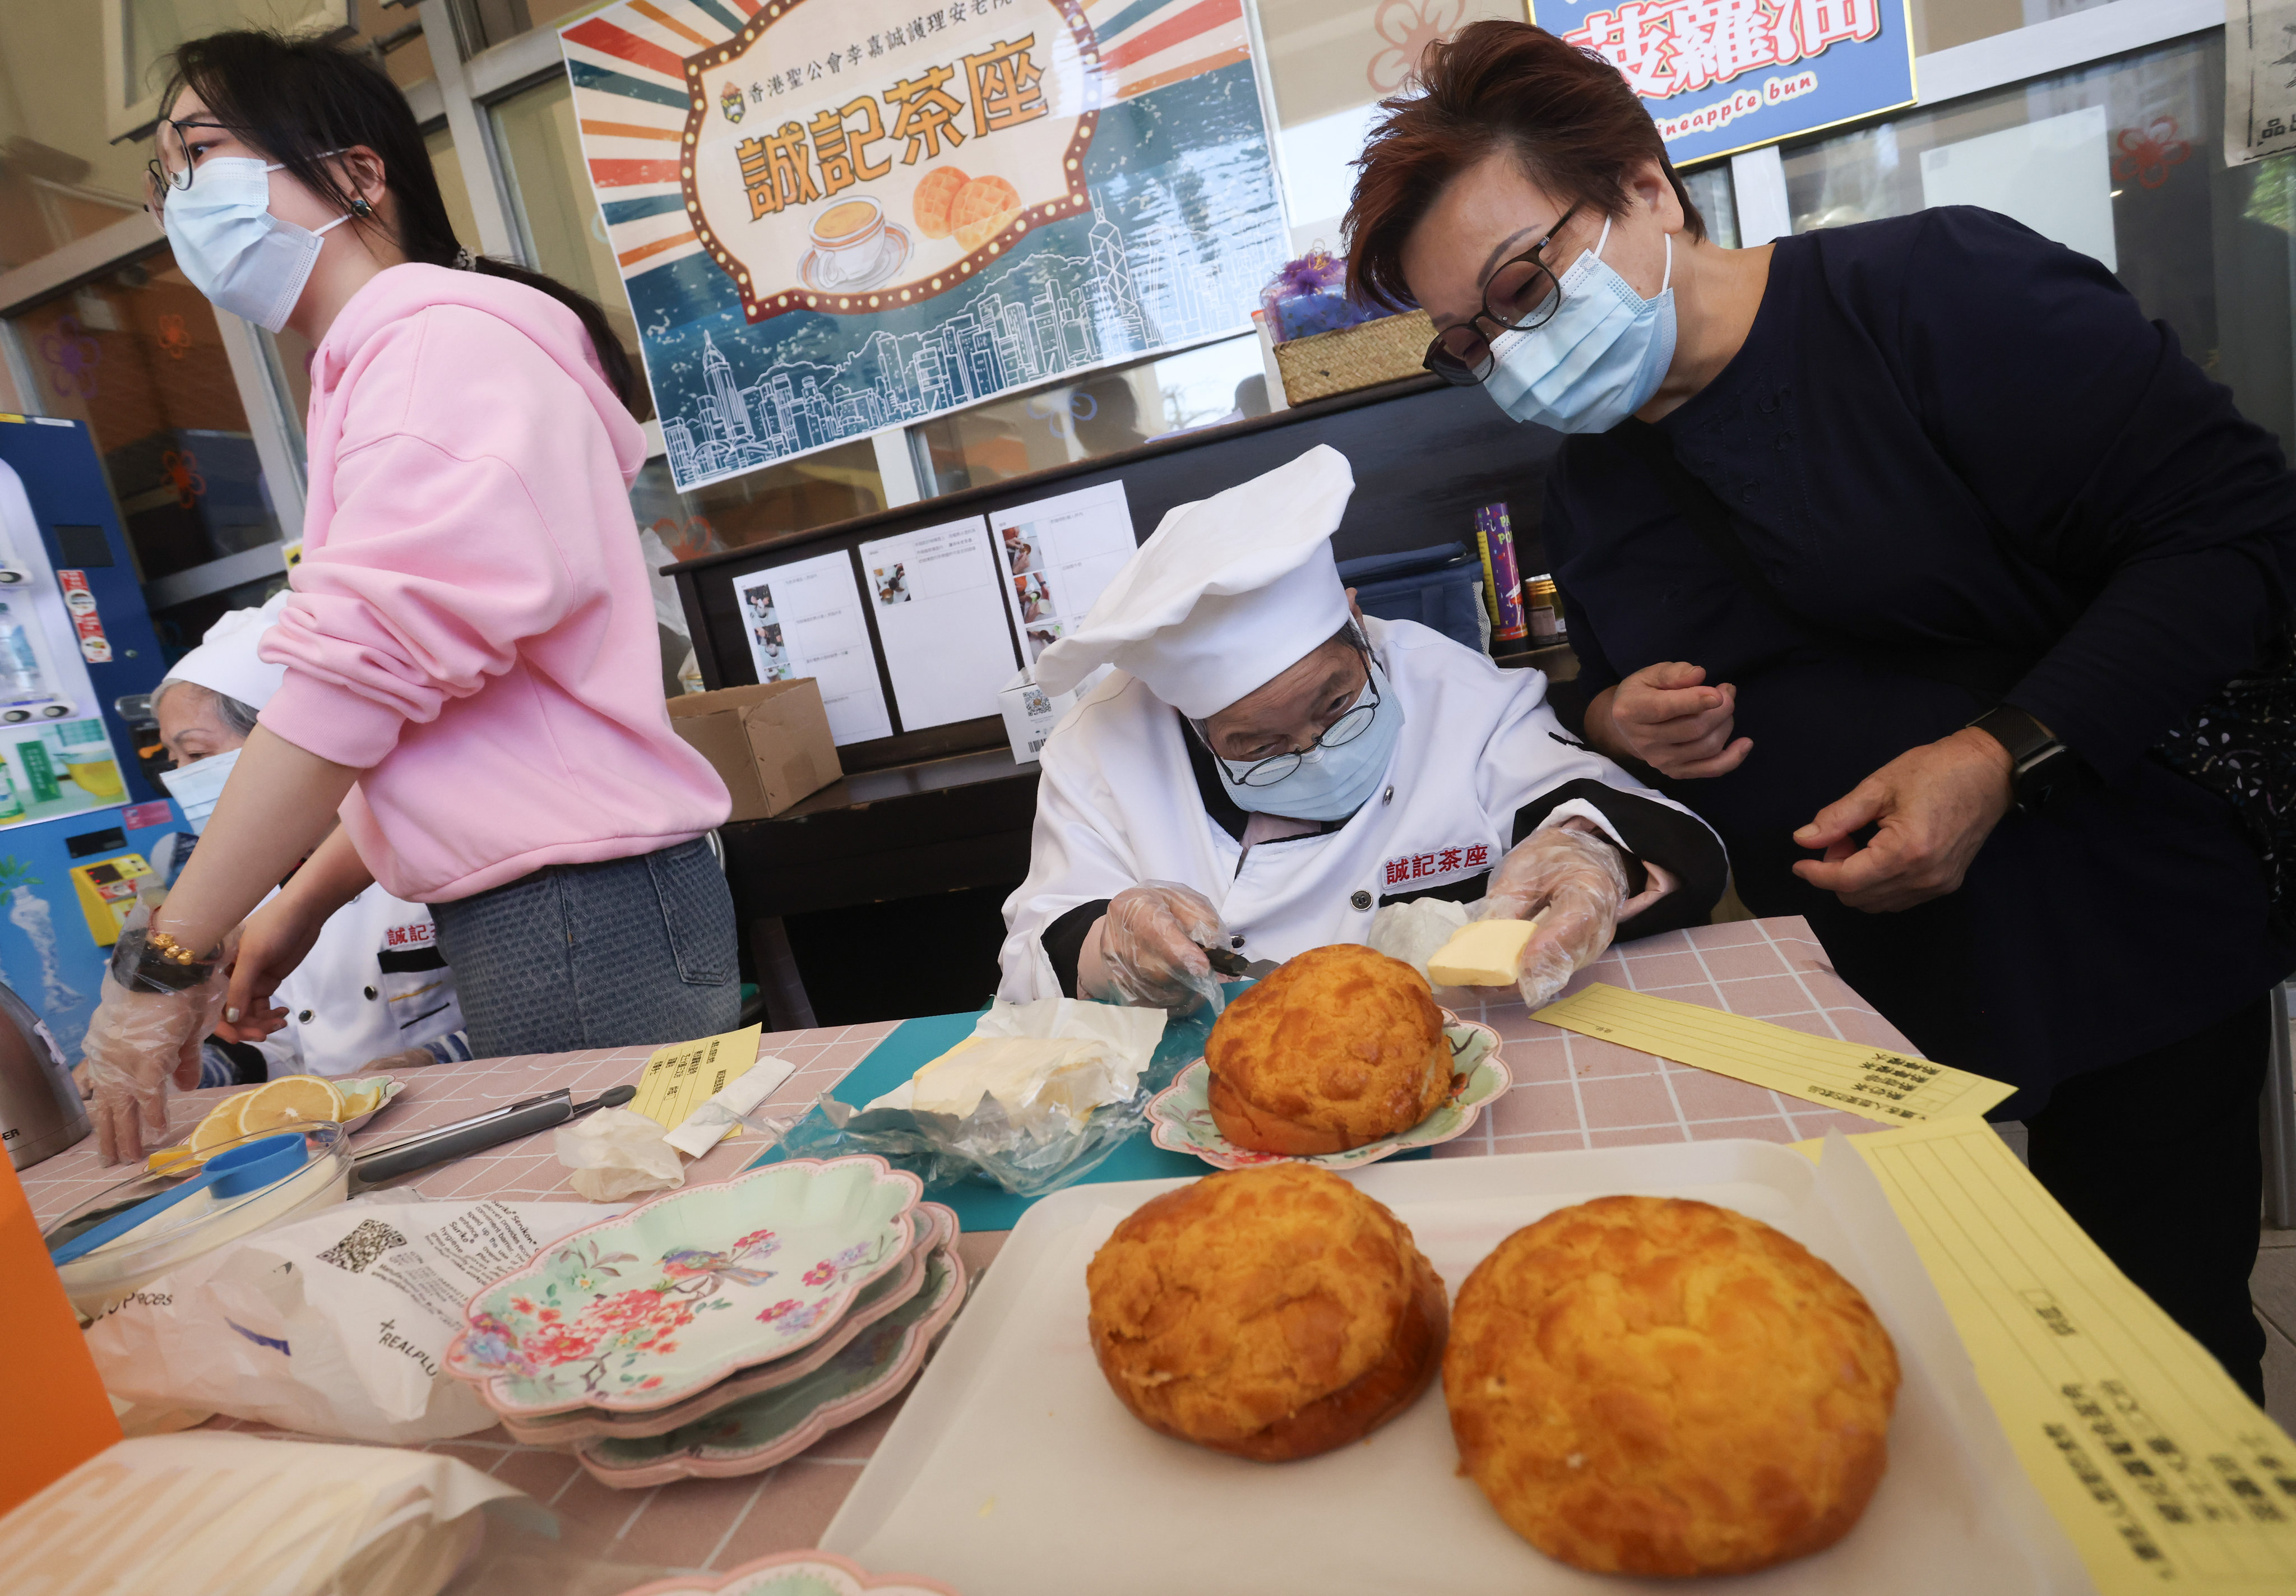 Mandy Lau watches over her 93-year-old Wong Shui-ying at Shing Kee Cafe, which has pineapple buns among items on the menu. Jonathan Wong